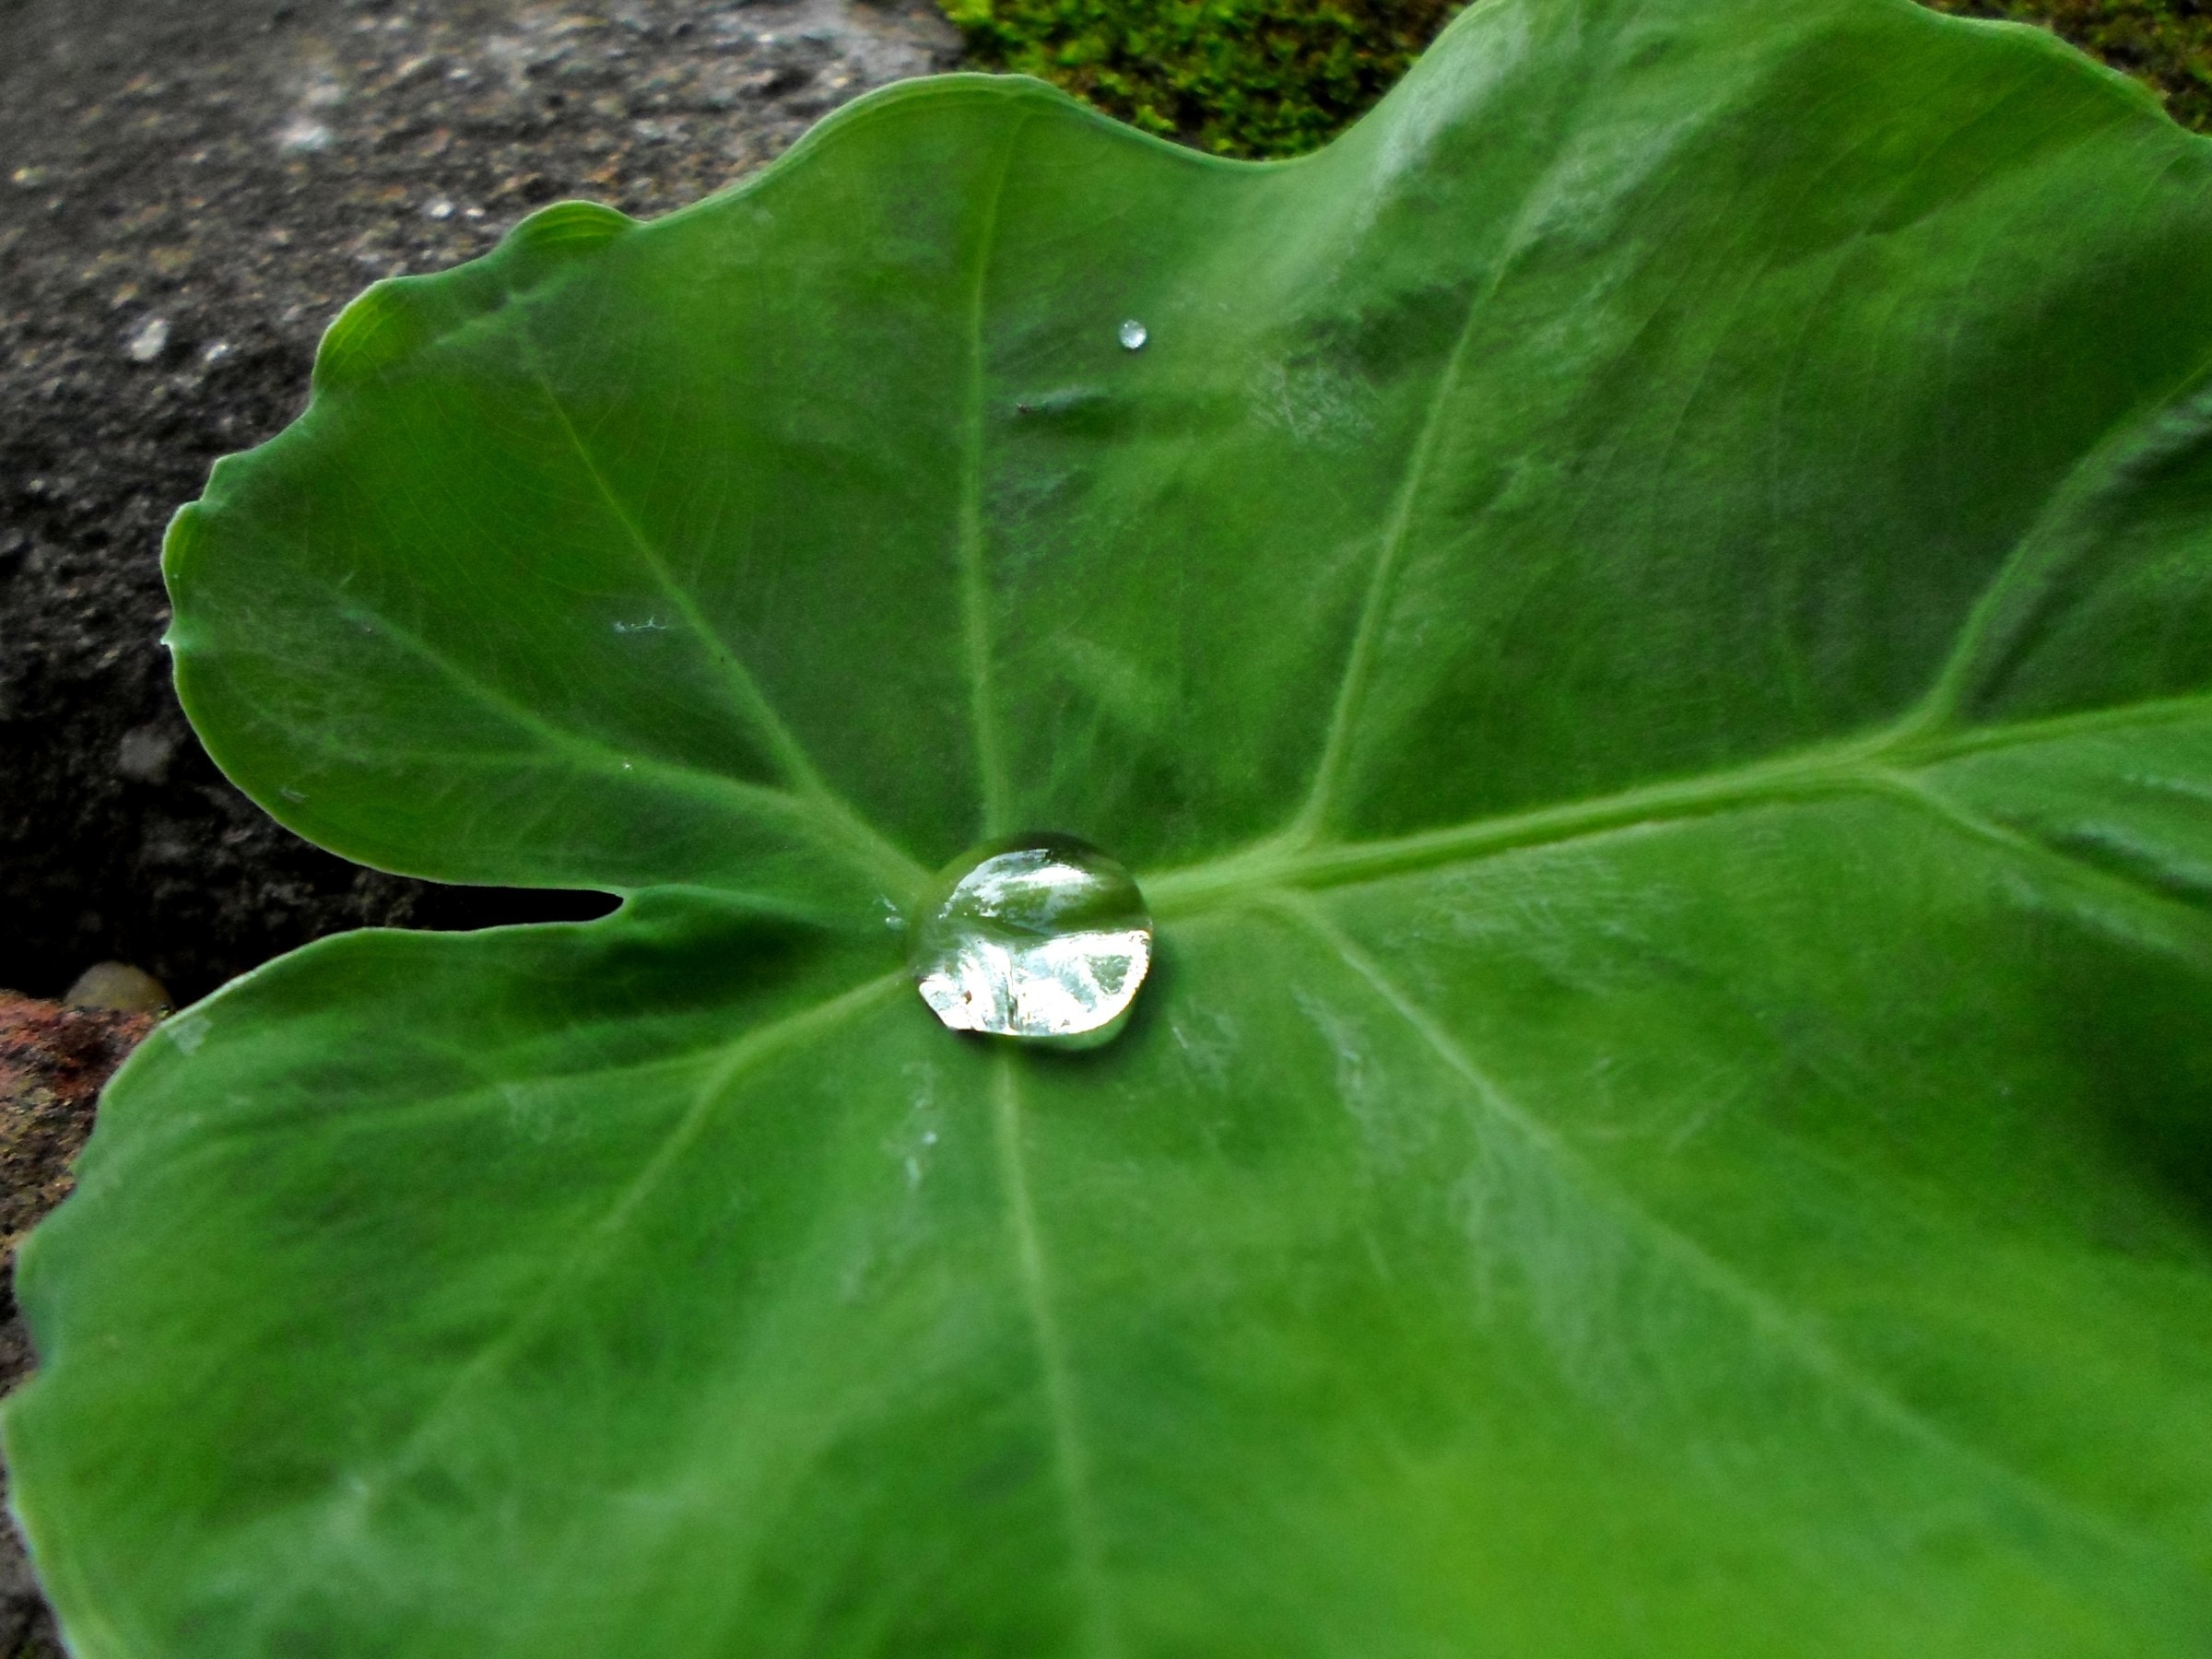 Leafy, Greens, Drops, Leaves, Water, green color, leaf